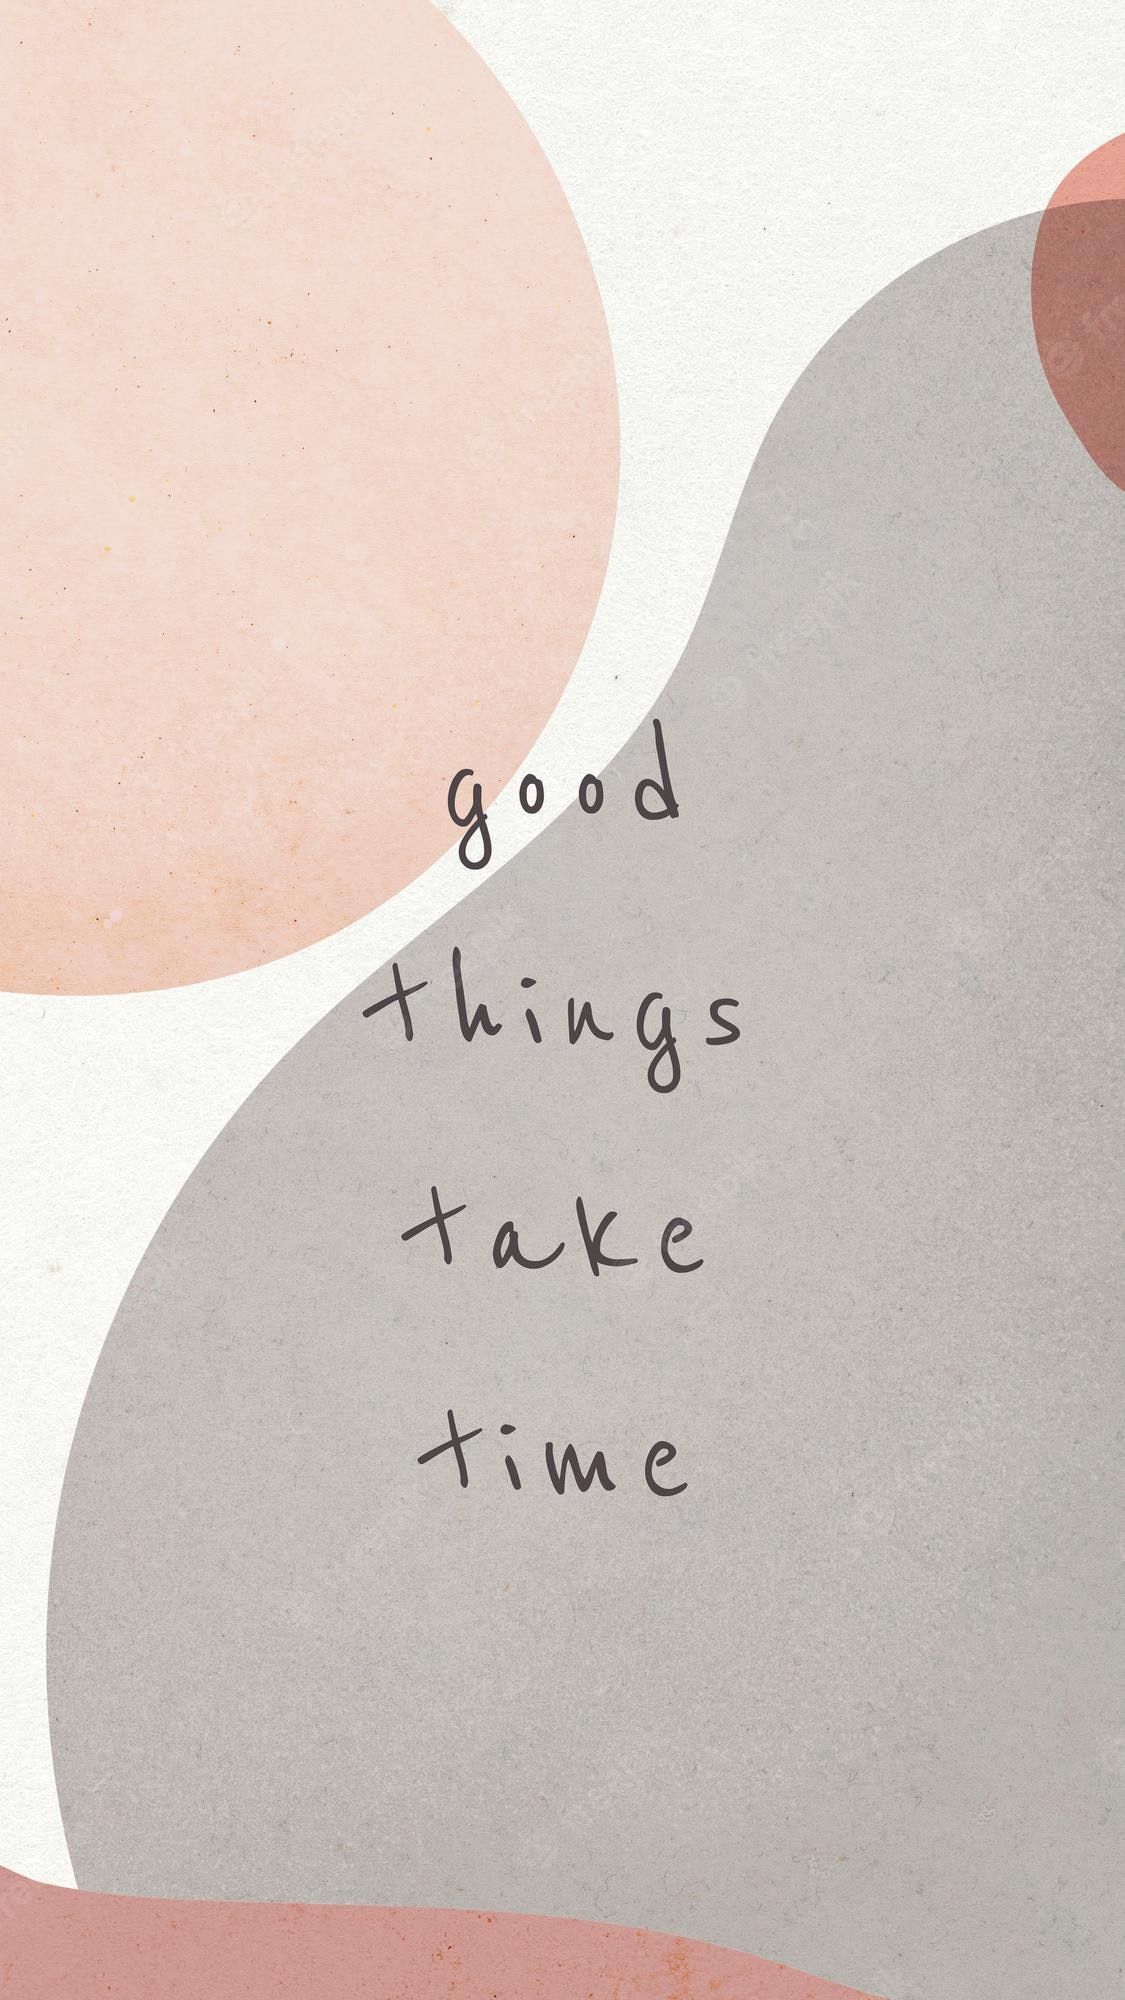 A poster that says good things take time - Quotes, inspirational, positivity, calligraphy, motivational